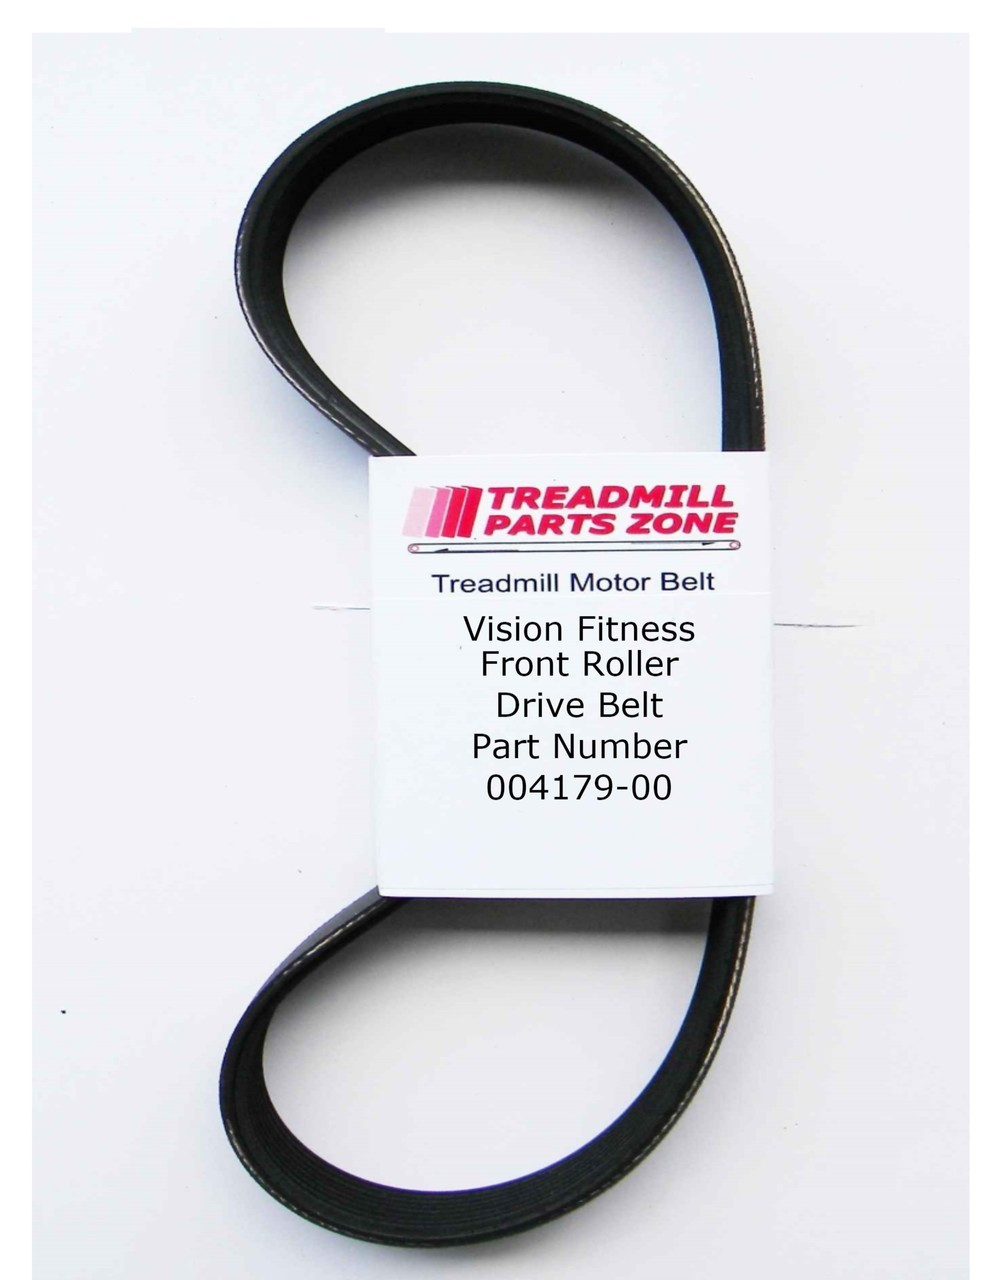 Vision Treadmill Model TM51F T9700 RUNNERS Front Roller Drive Belt Part Number 004179-00